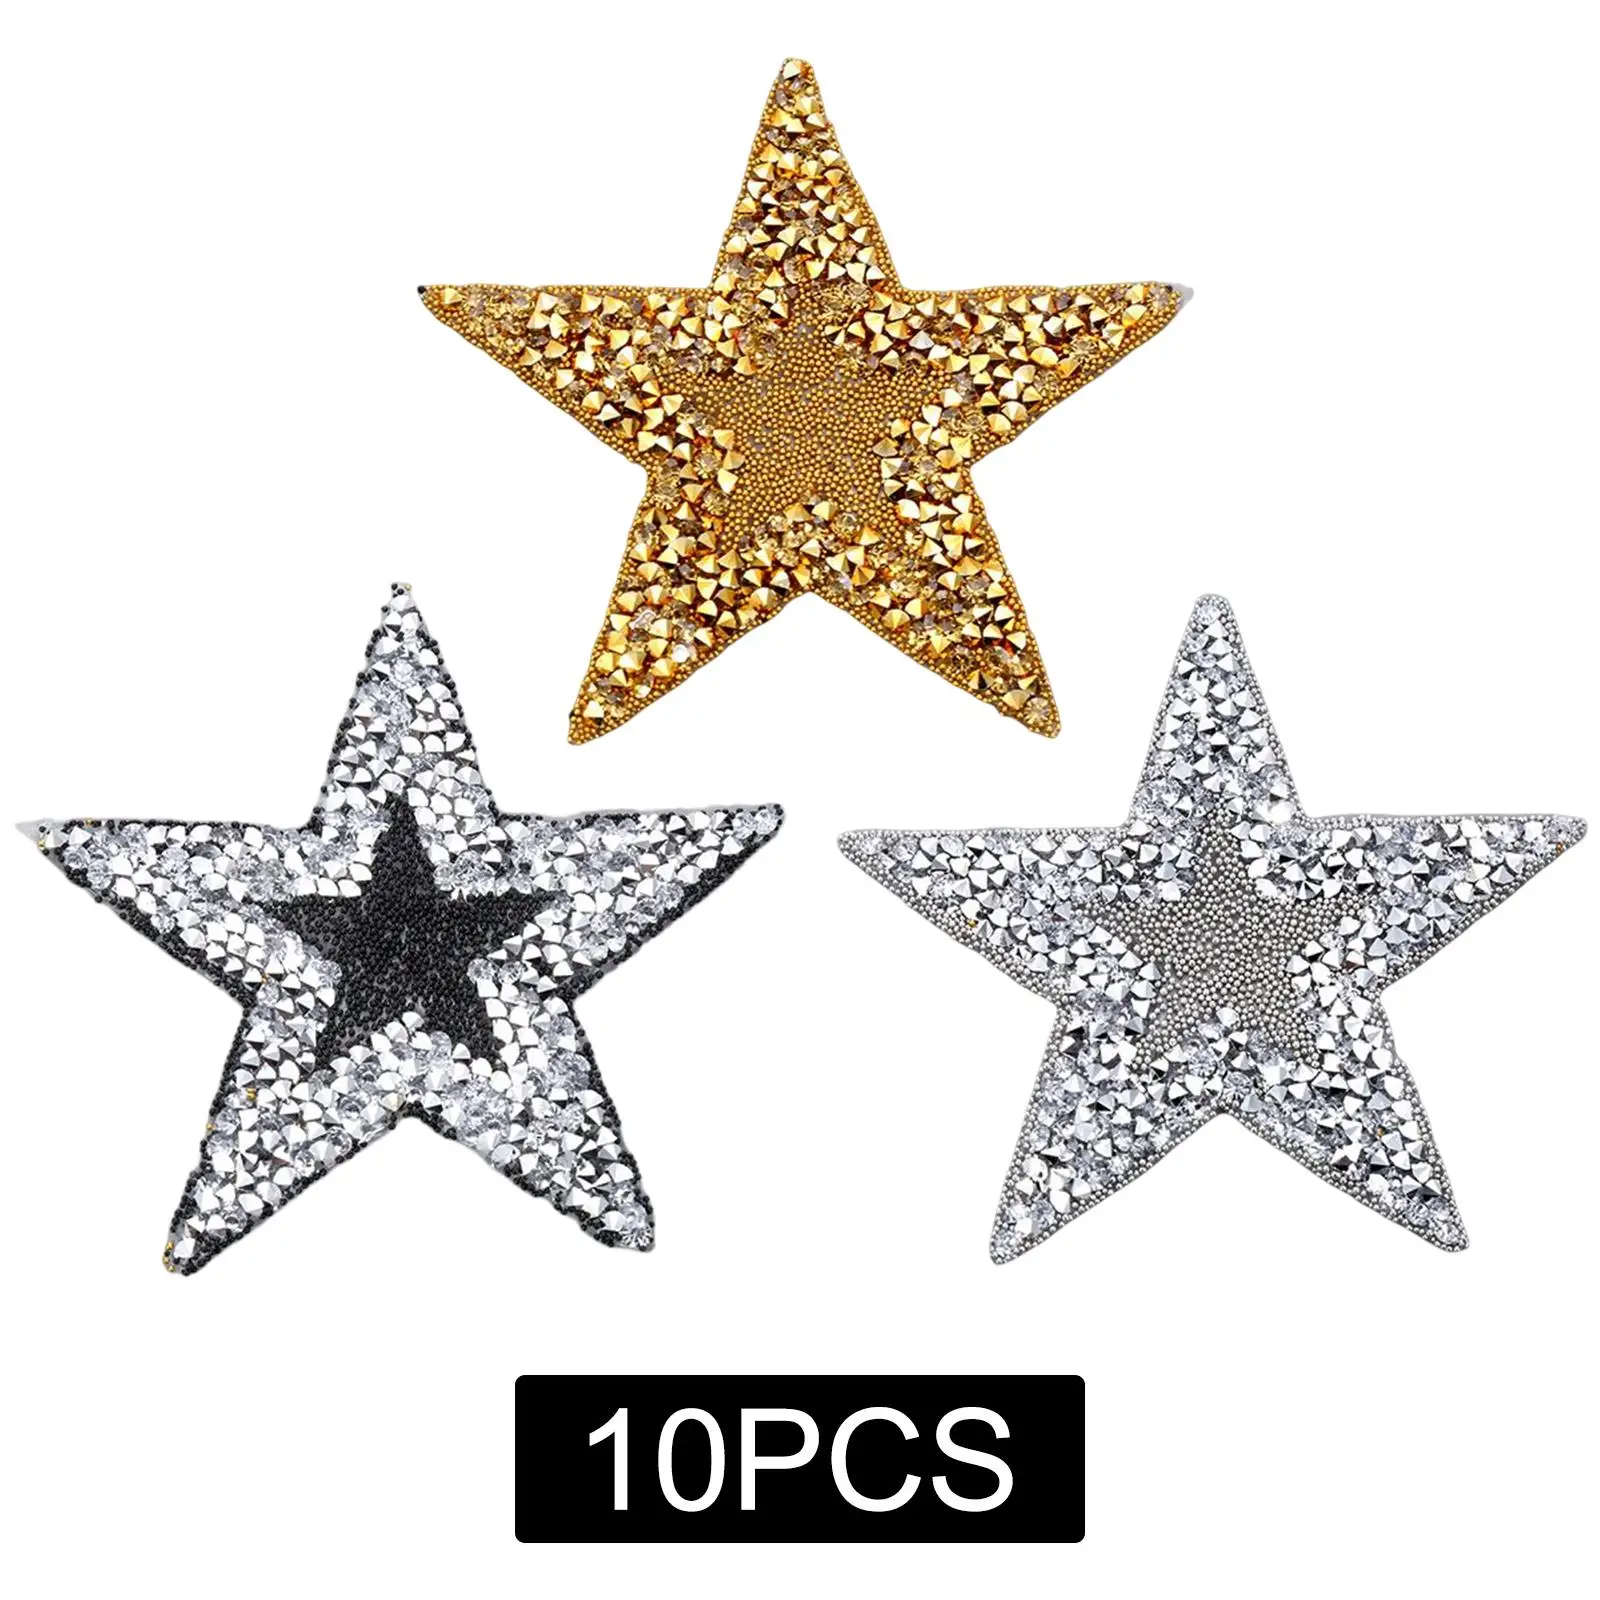 10X Star Embroidery Patches Sew Iron on Applique Clothing Bag Sewing Badge DIY